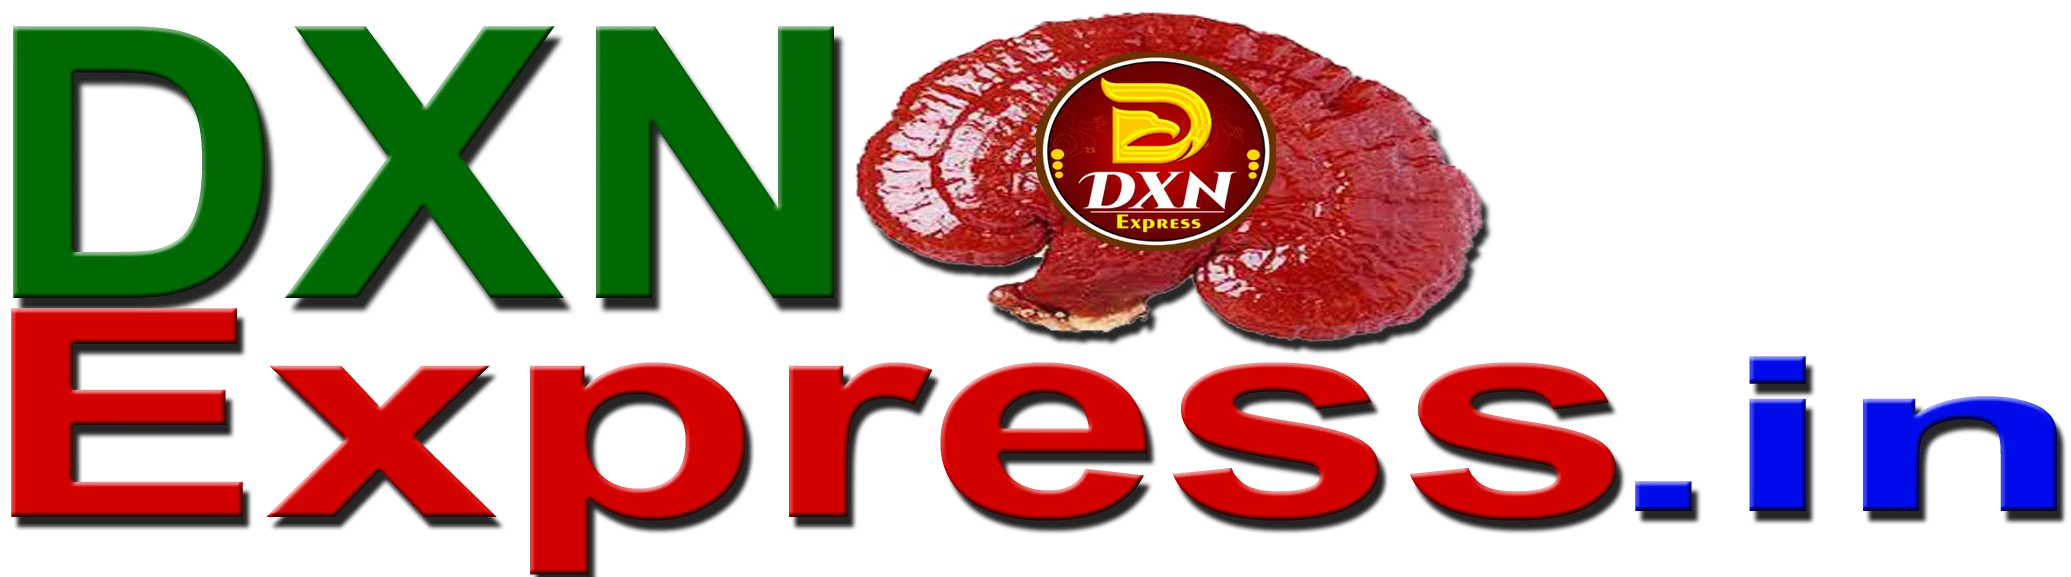 What is DXN Company? - learn